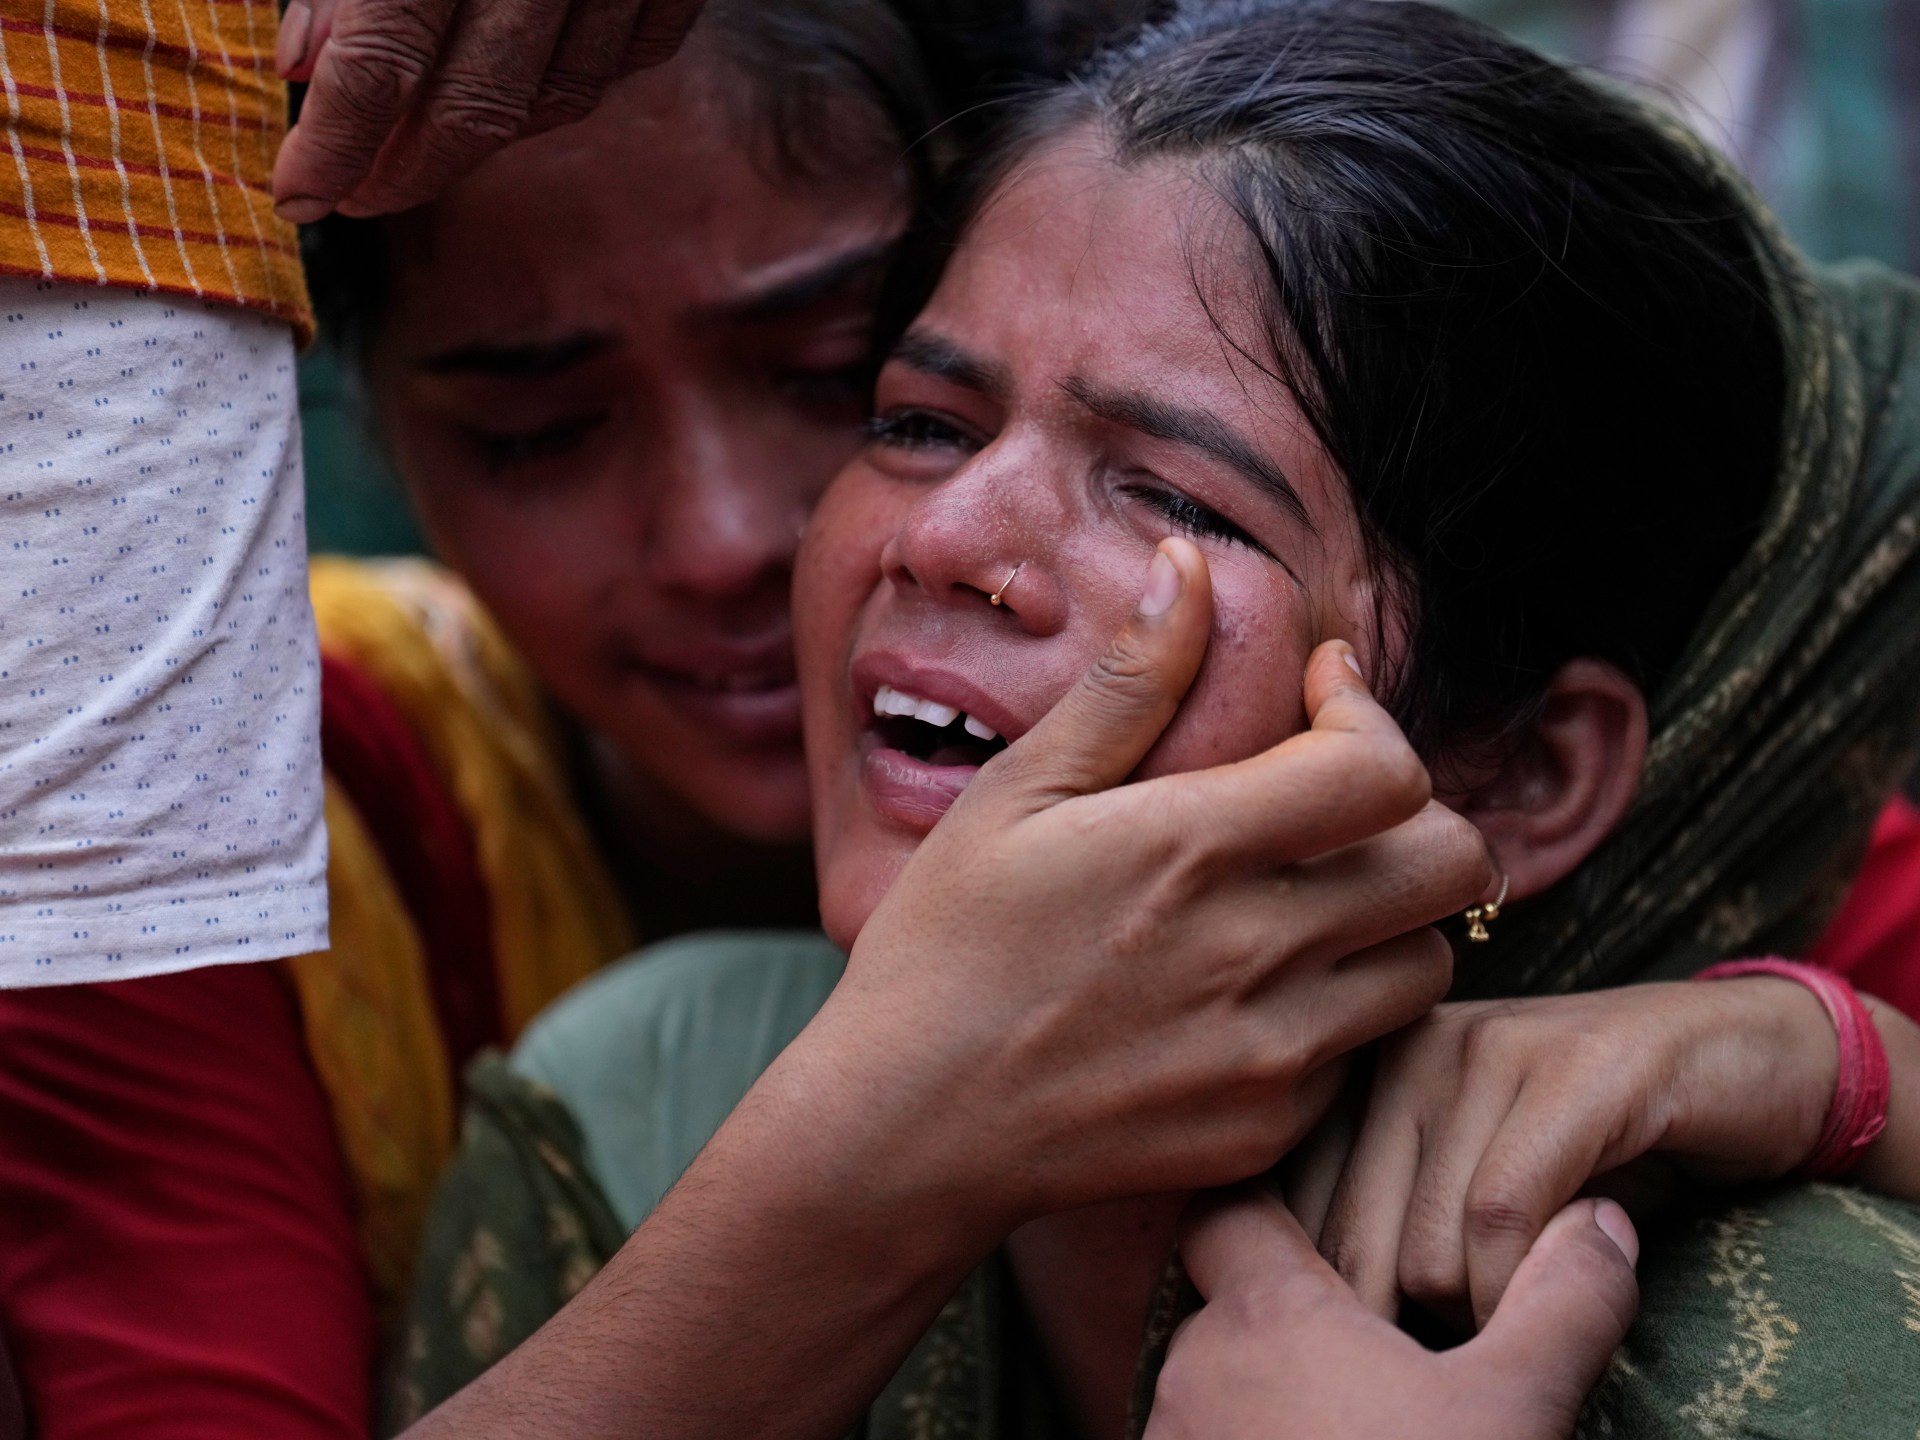 Families of India stampede victims ponder future without loved ones | Religion News